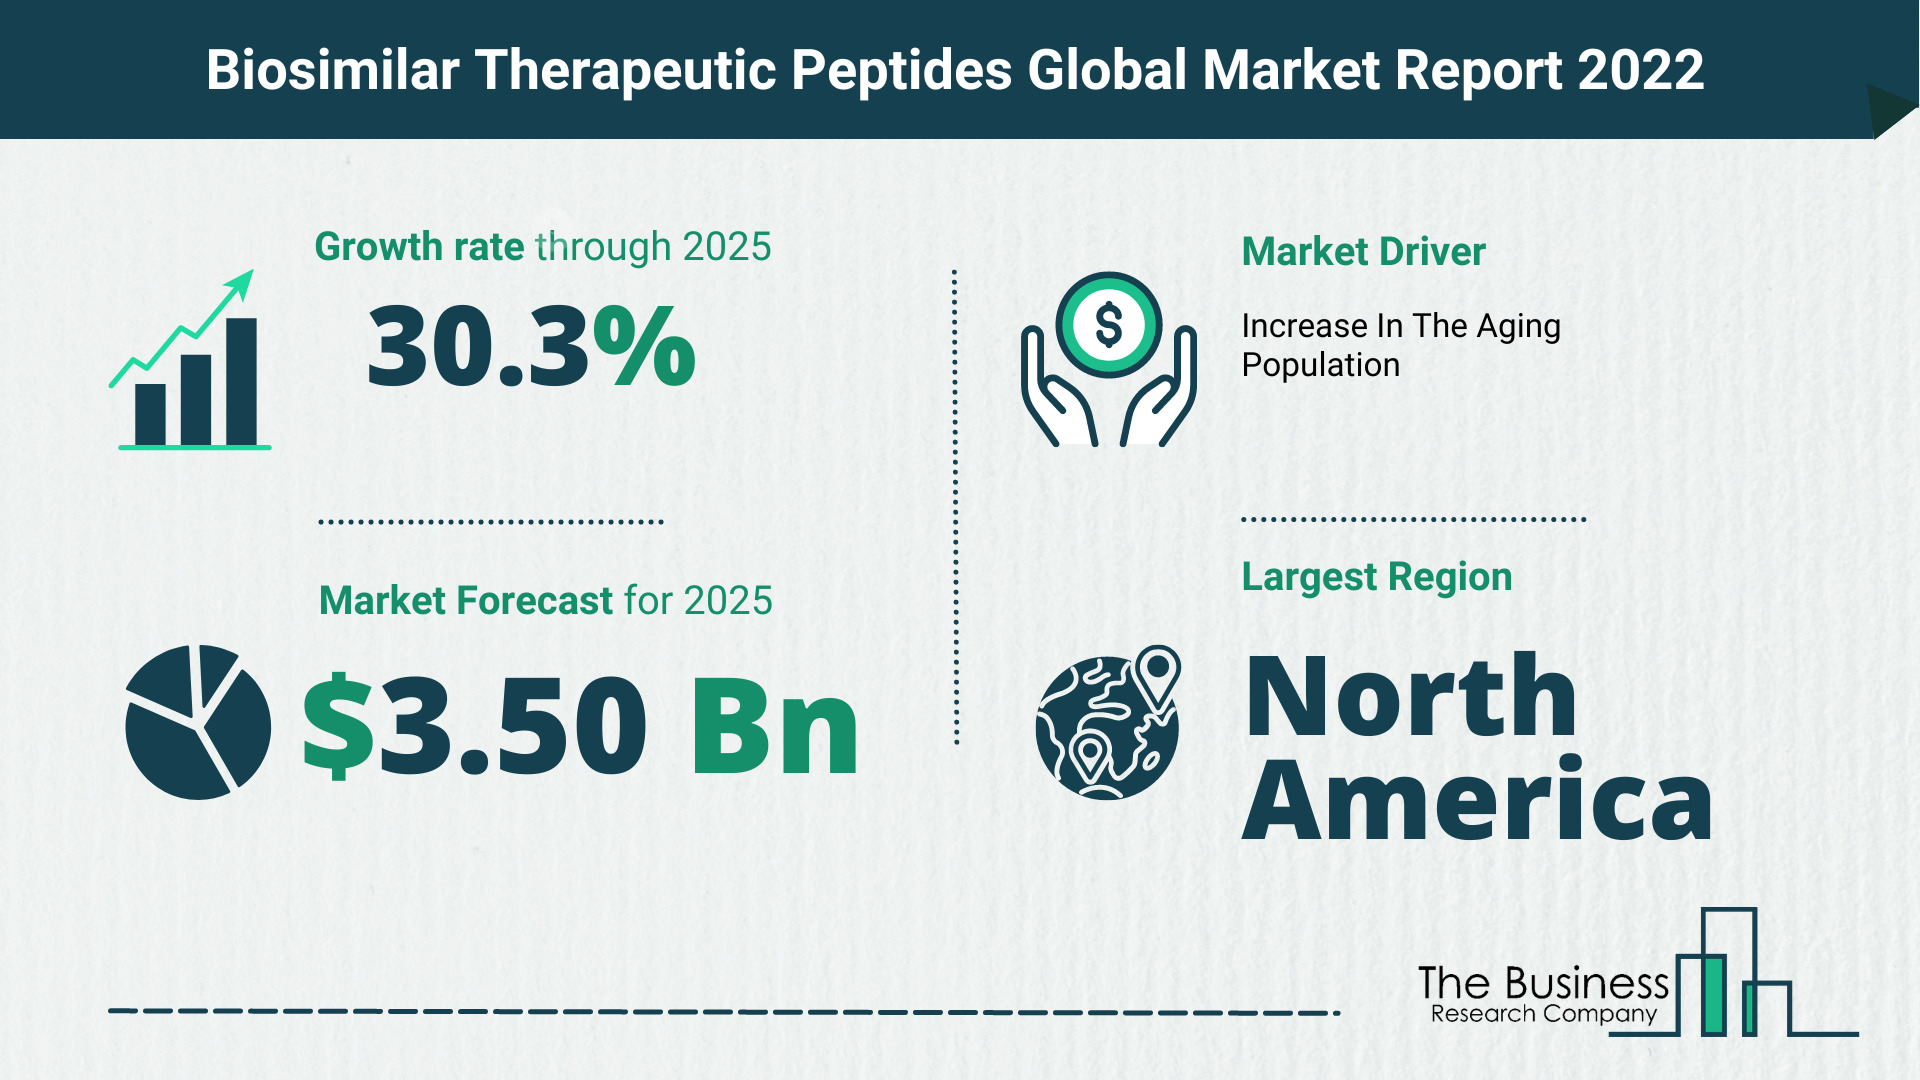 The Biosimilar Therapeutic Peptides Market Share, Market Size, And Growth Rate 2022